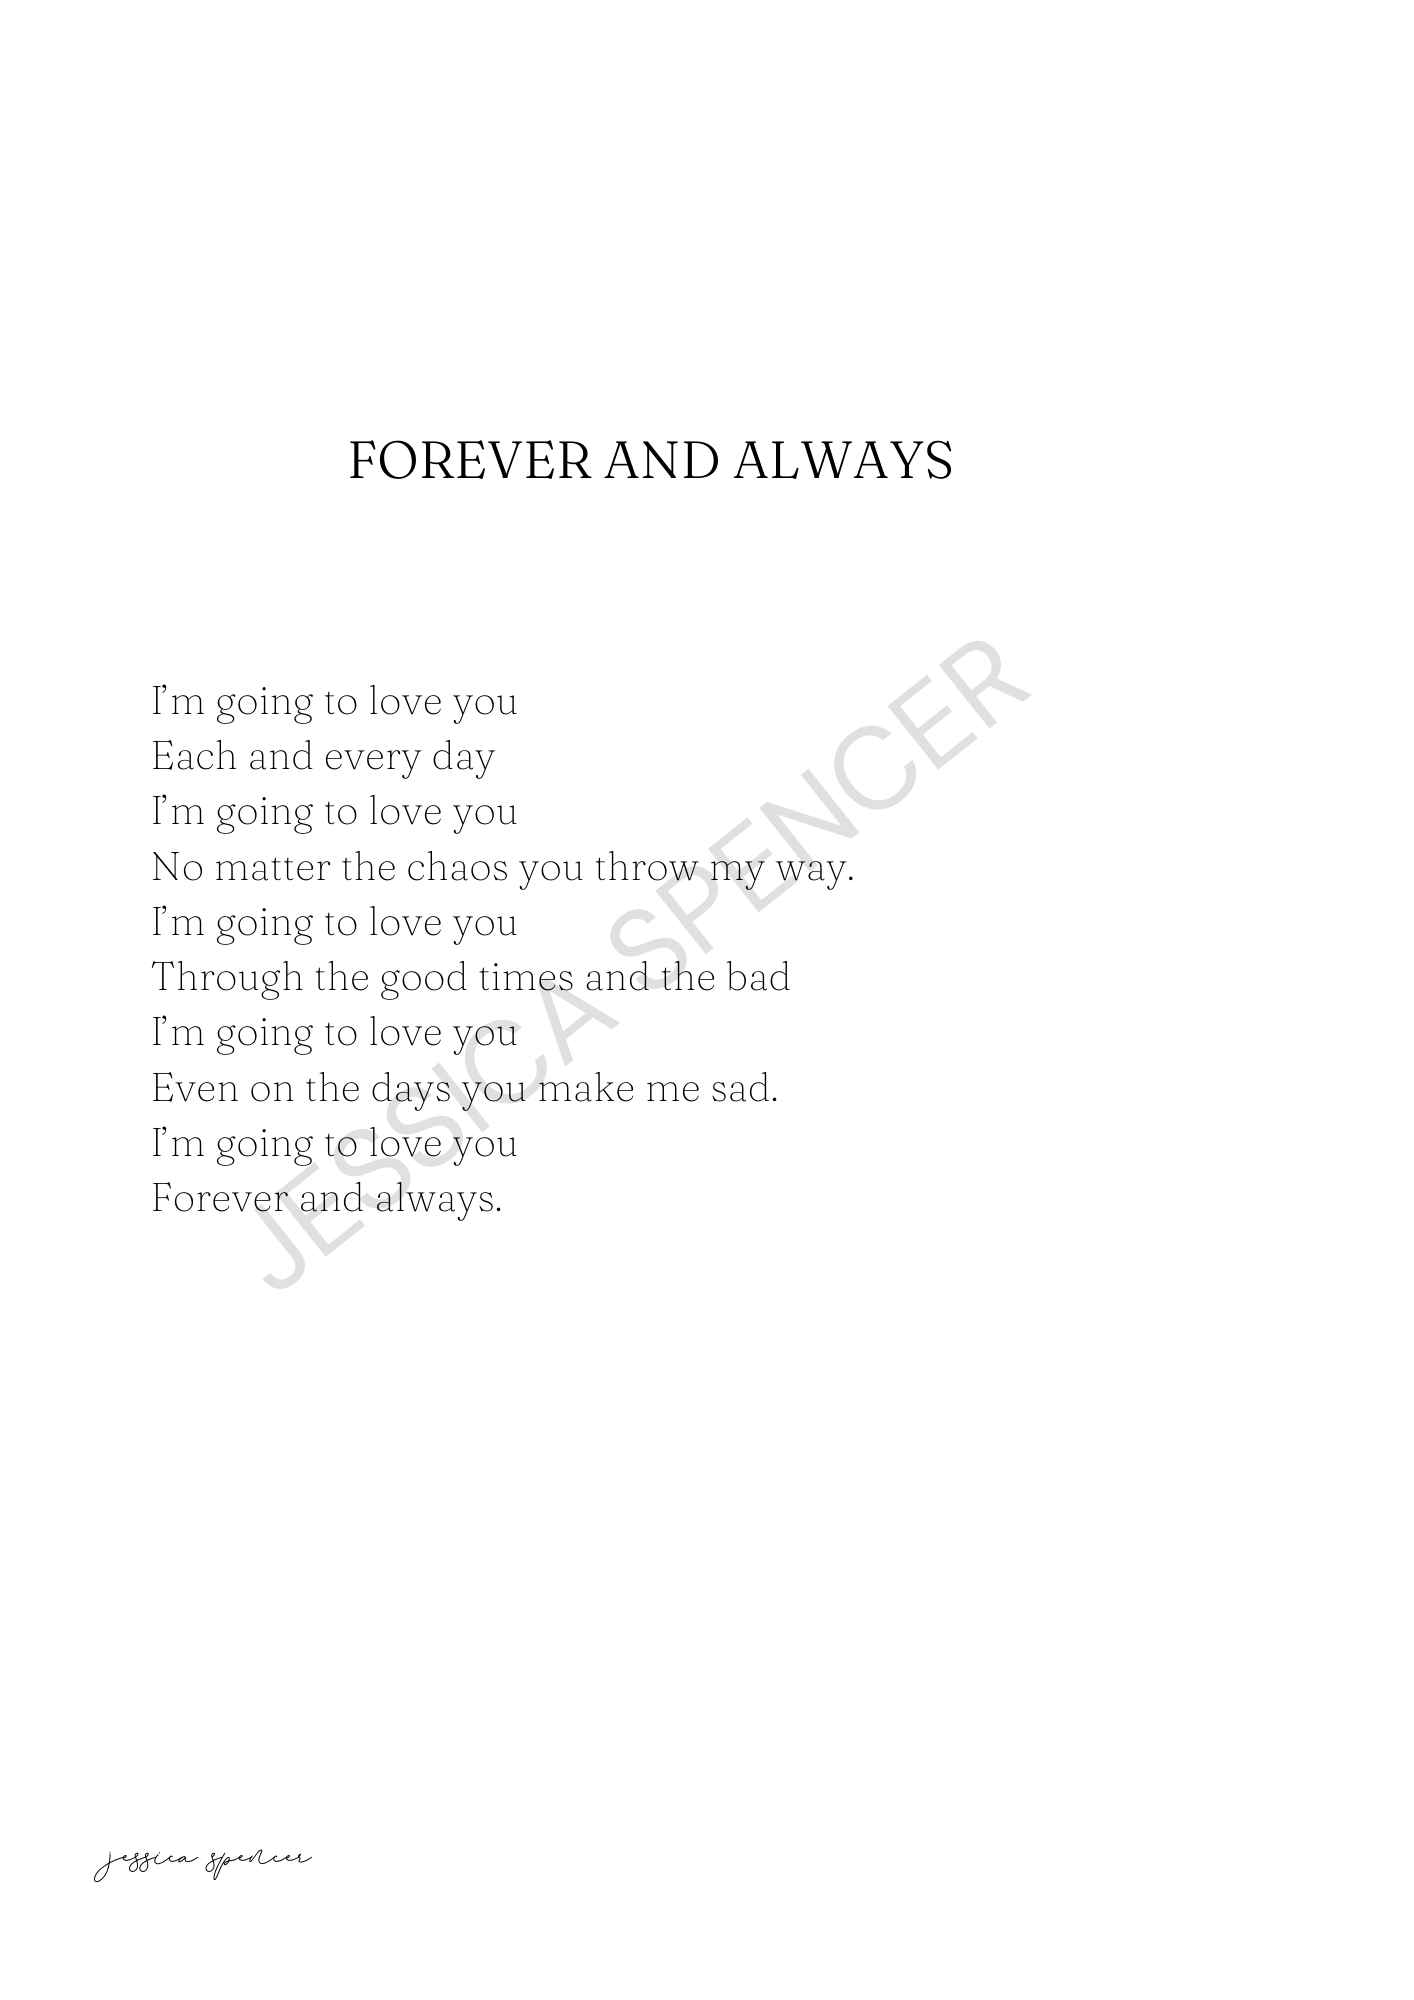 Forever and Always Poem